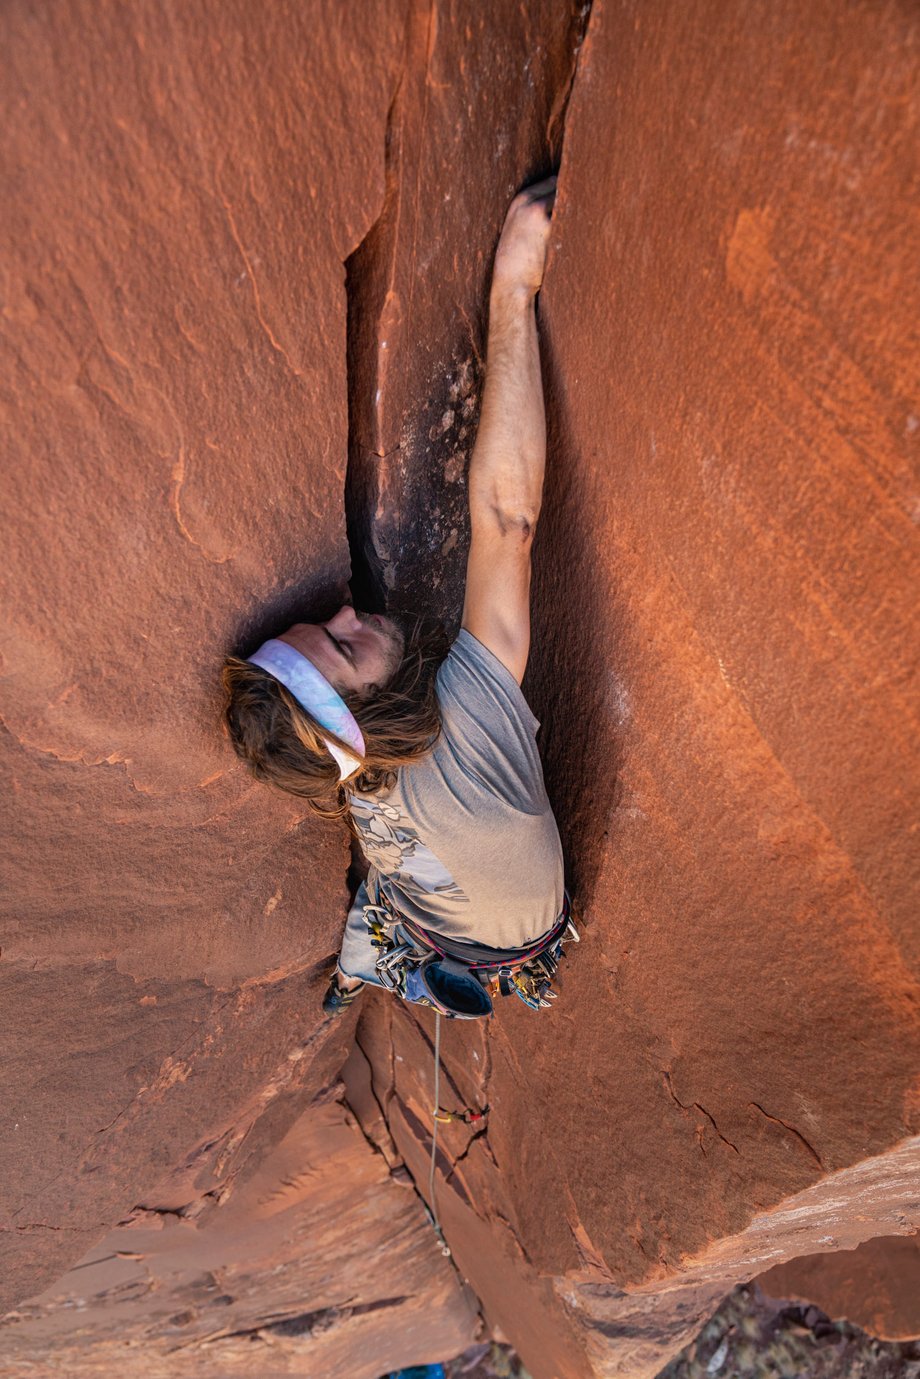 Dalton Johnson photographs crack climbing in Moab and Indian Creek for Gregory Packs and Coalatree